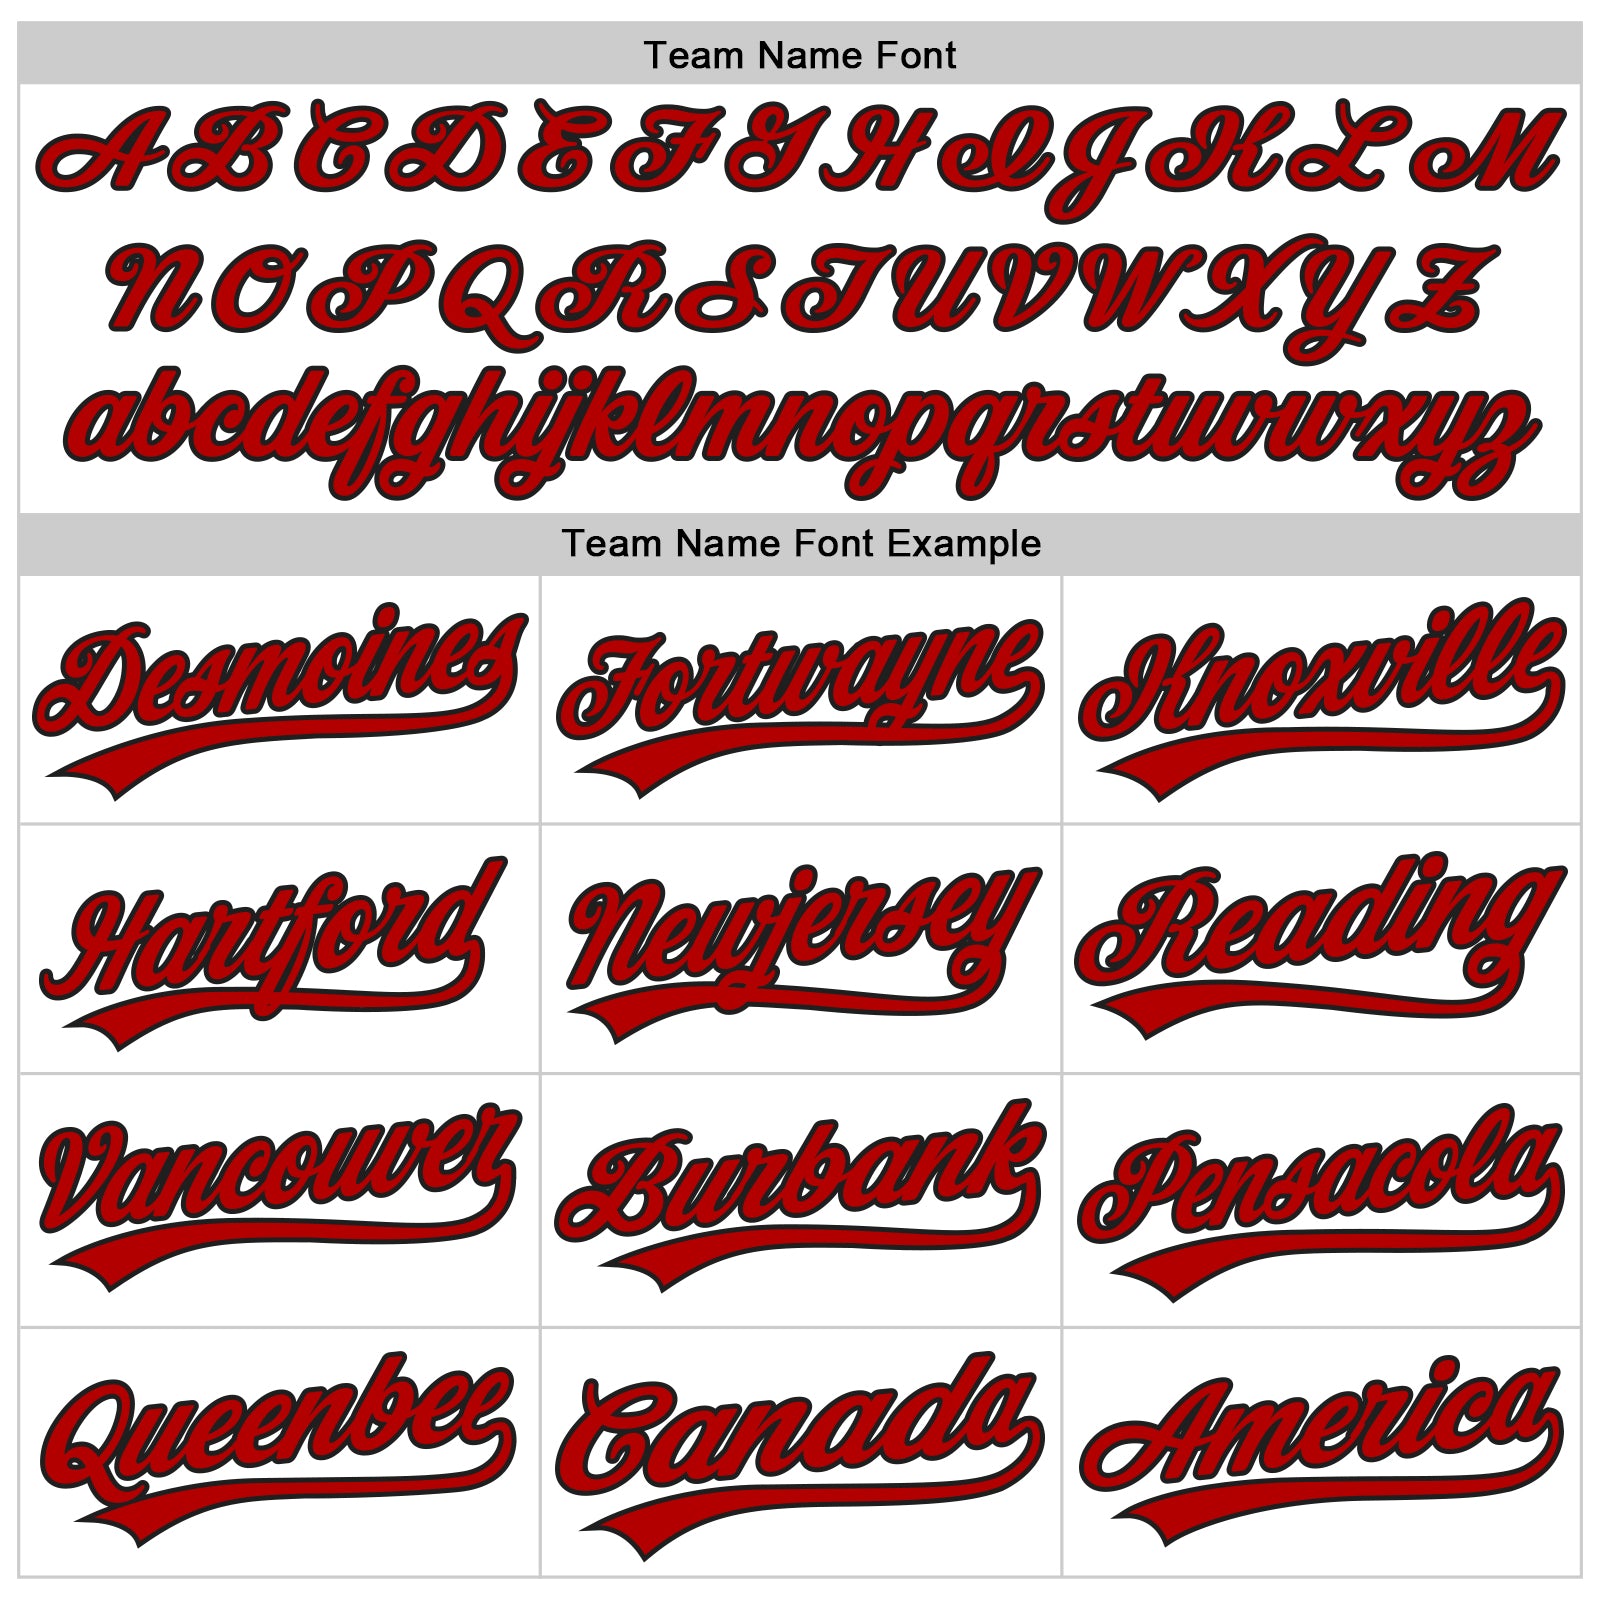 Custom White Red-Black 3D Pattern Design Curve Lines Authentic Baseball Jersey